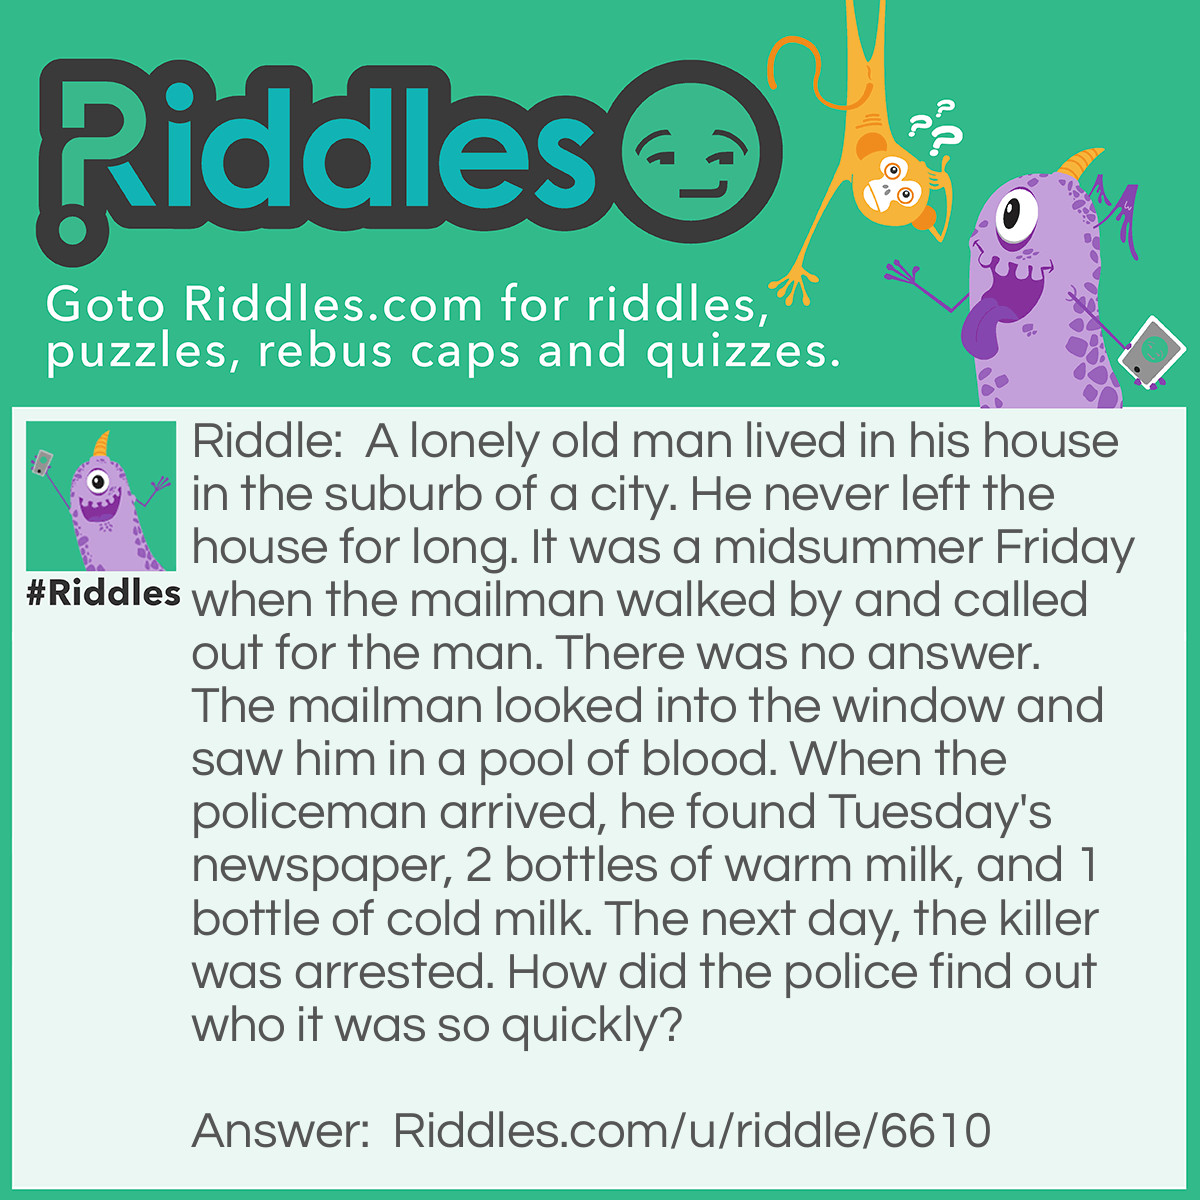 Riddle: A lonely old man lived in his house in the suburb of a city. He never left the house for long. It was a midsummer Friday when the mailman walked by and called out for the man. There was no answer. The mailman looked into the window and saw him in a pool of blood. When the policeman arrived, he found Tuesday's newspaper, 2 bottles of warm milk, and 1 bottle of cold milk. The next day, the killer was arrested. How did the police find out who it was so quickly? Answer: The Mailman.